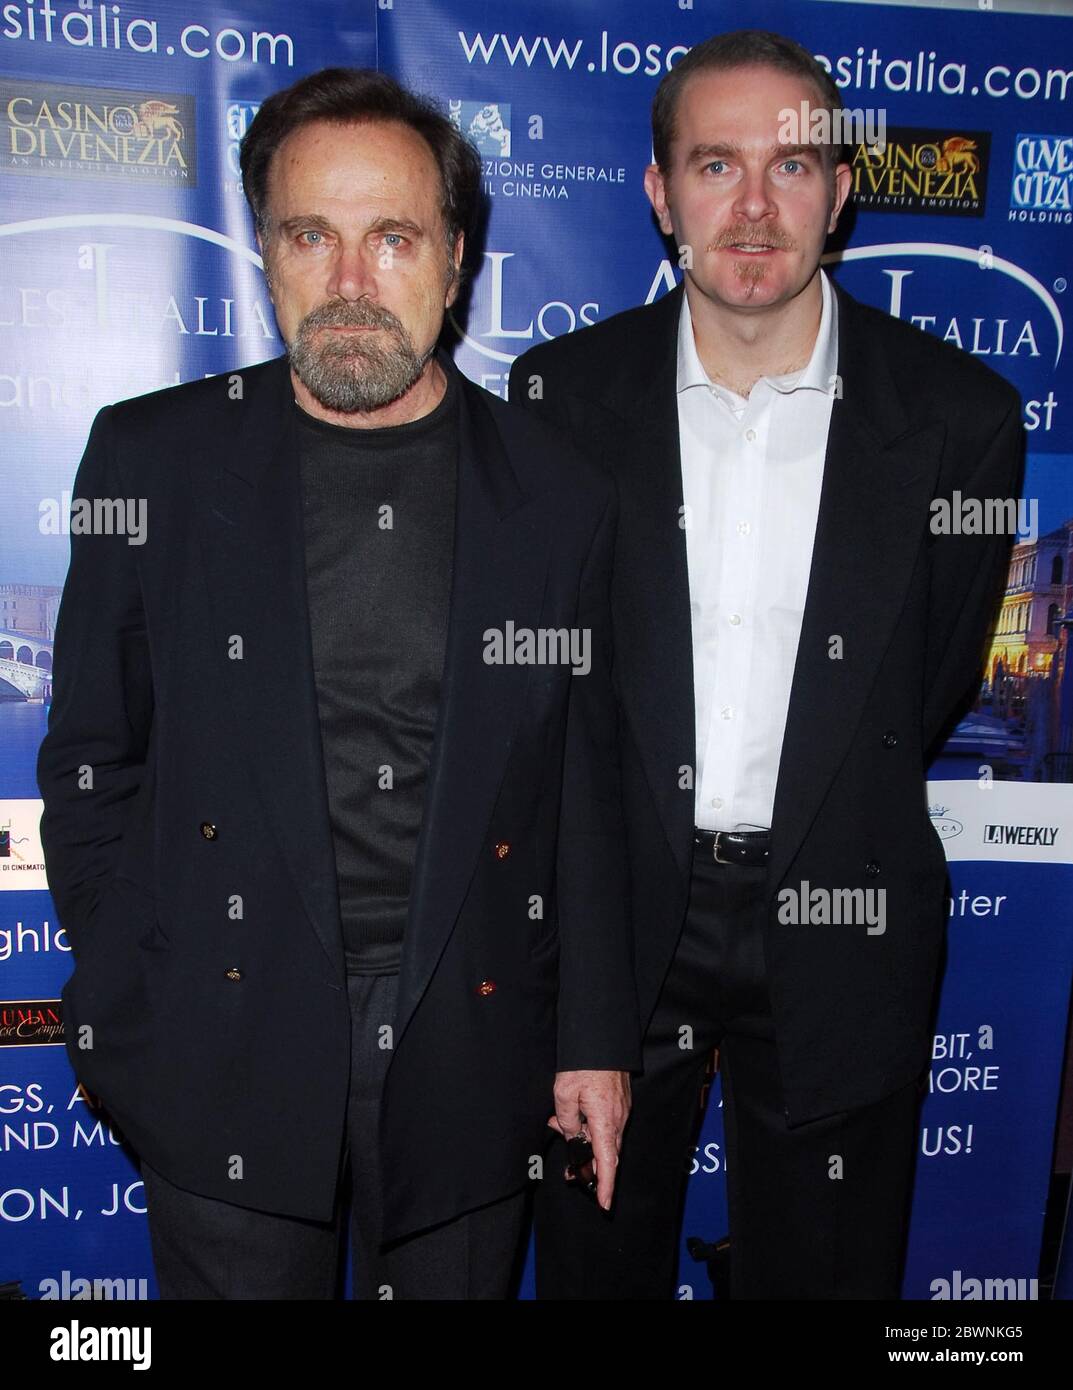 Franco Nero and Carlo Gabriel Nero at the "Los Angeles, Italia" FIlm Festival Presents the Los Angeles Premiere of "All The Invisible Children held at the Mann Chinese 6 Theatres in Hollywood, CA. The event took place on Monday, February 19, 2007. Photo by: SBM / PictureLux- File Reference # 34006-3082SBMPLX Stock Photo